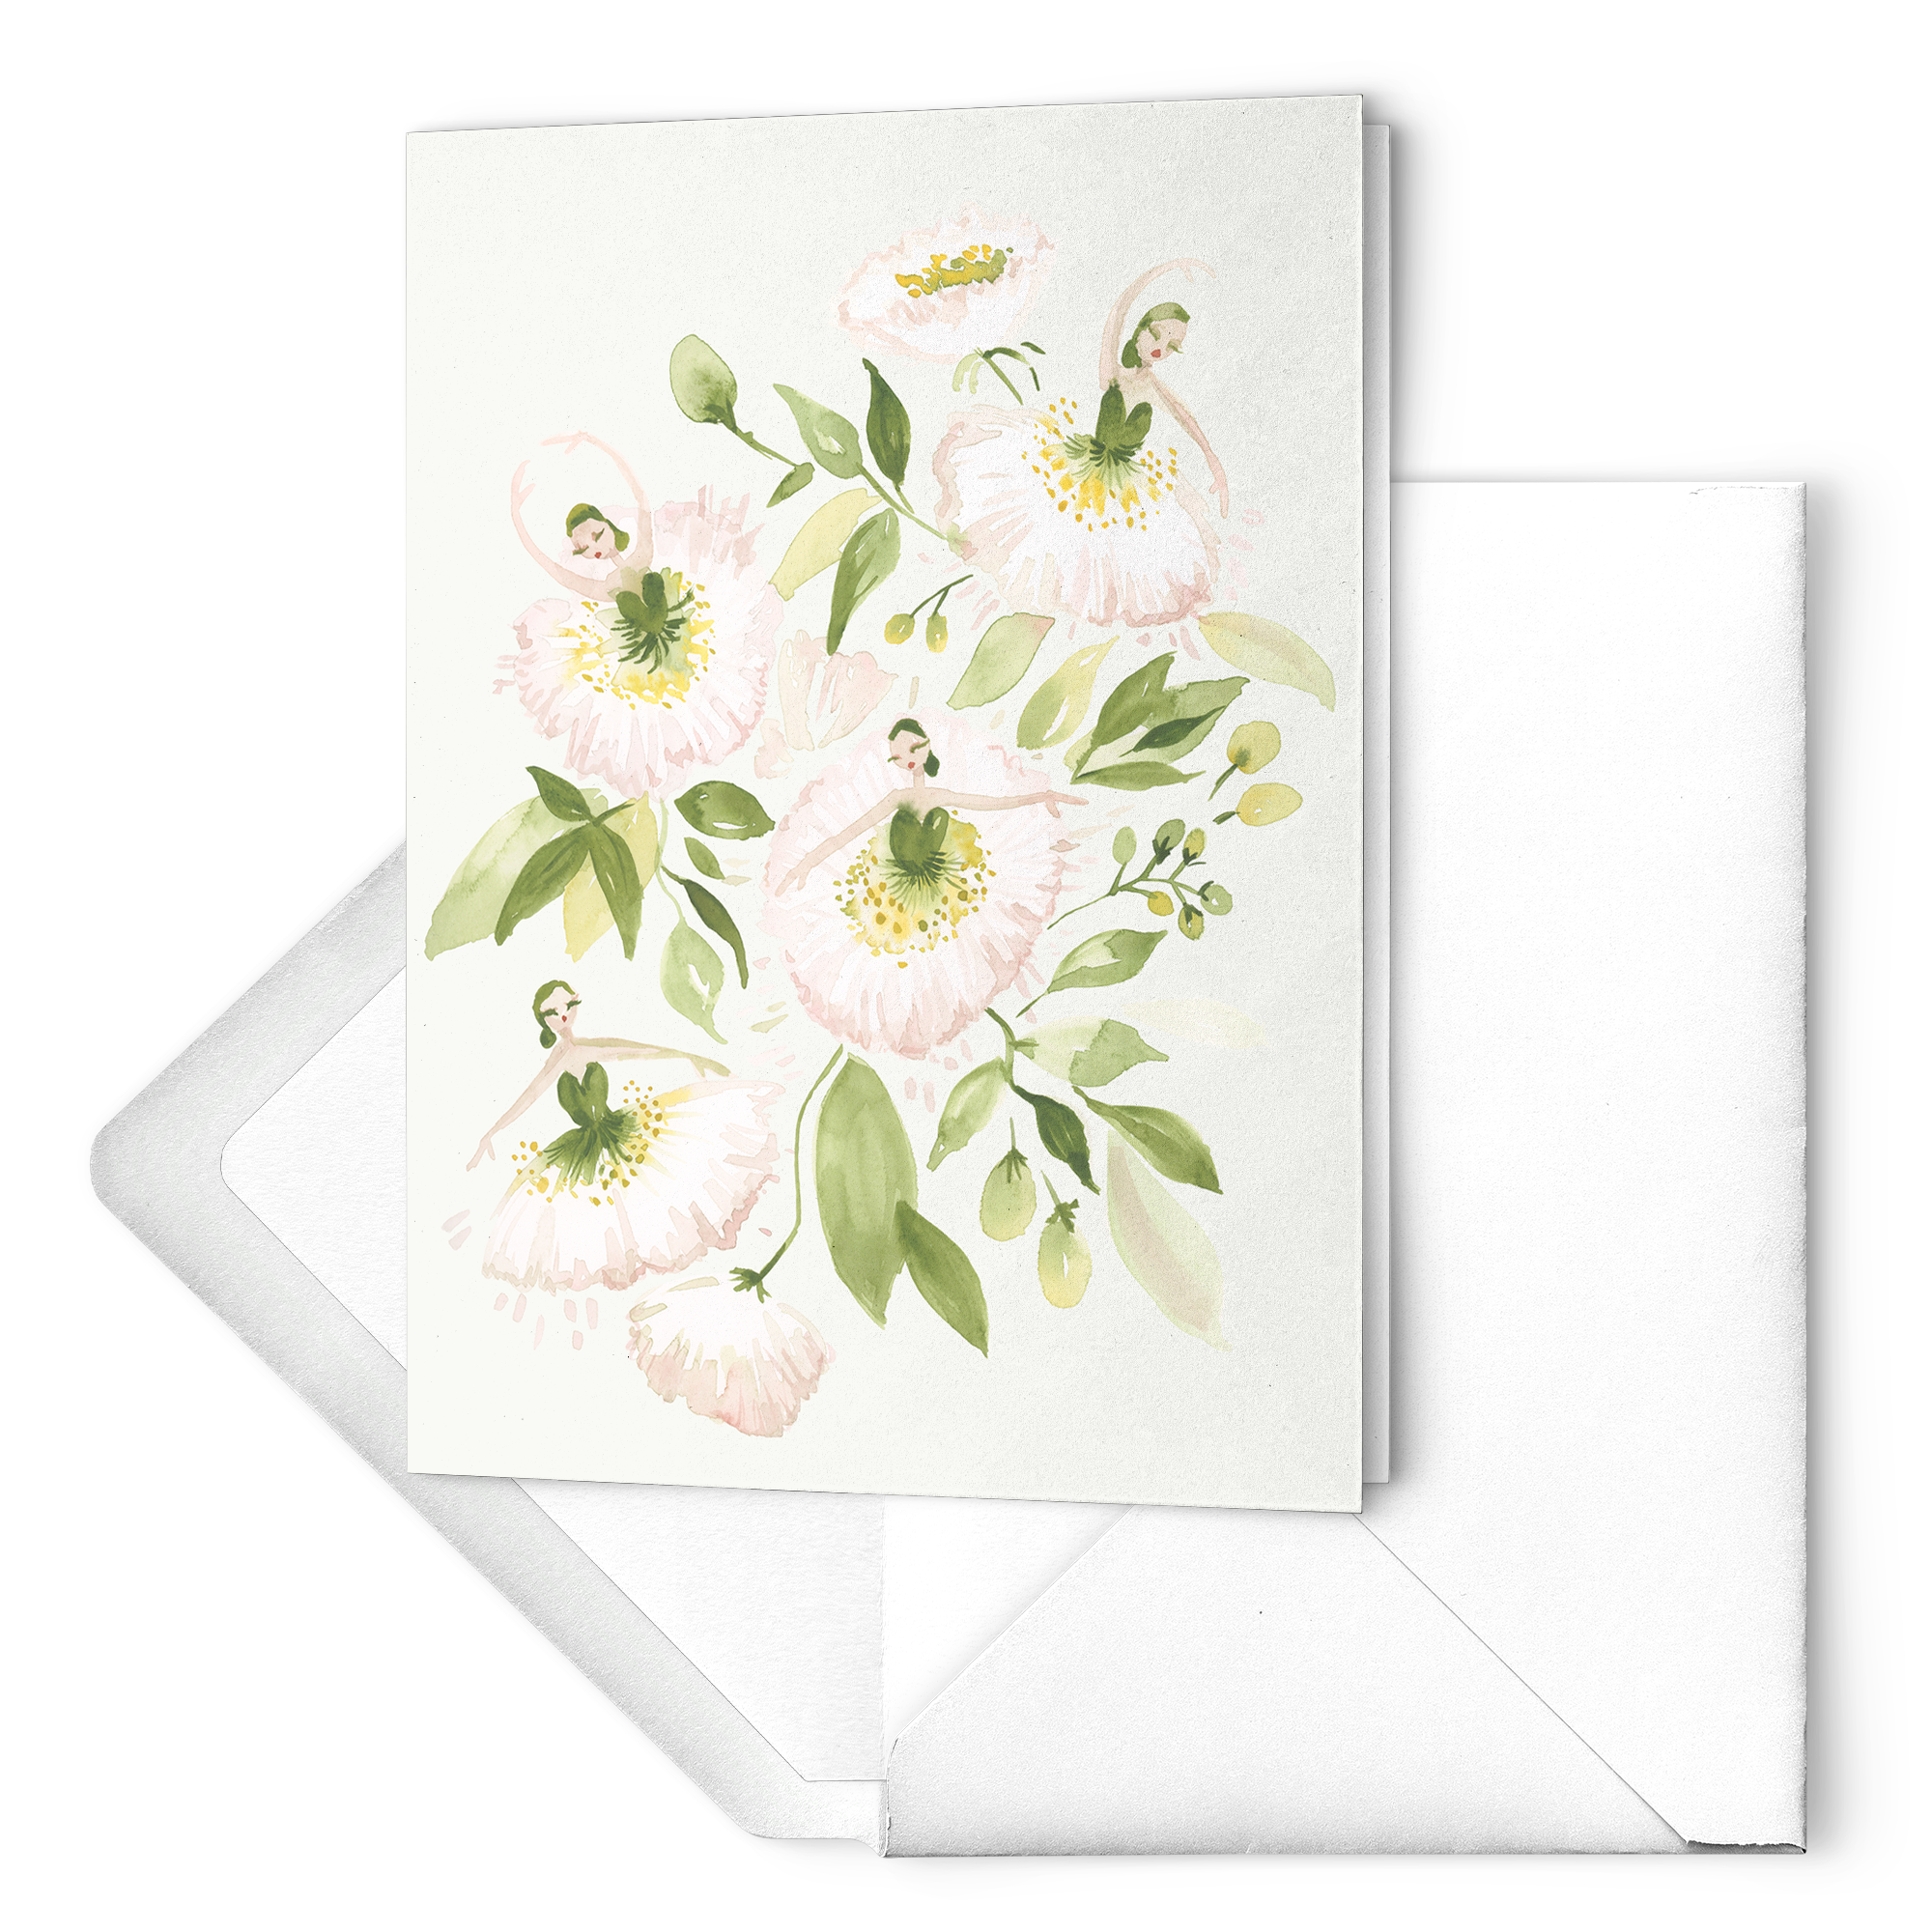 Waltz of the Anemones Greeting Card Set